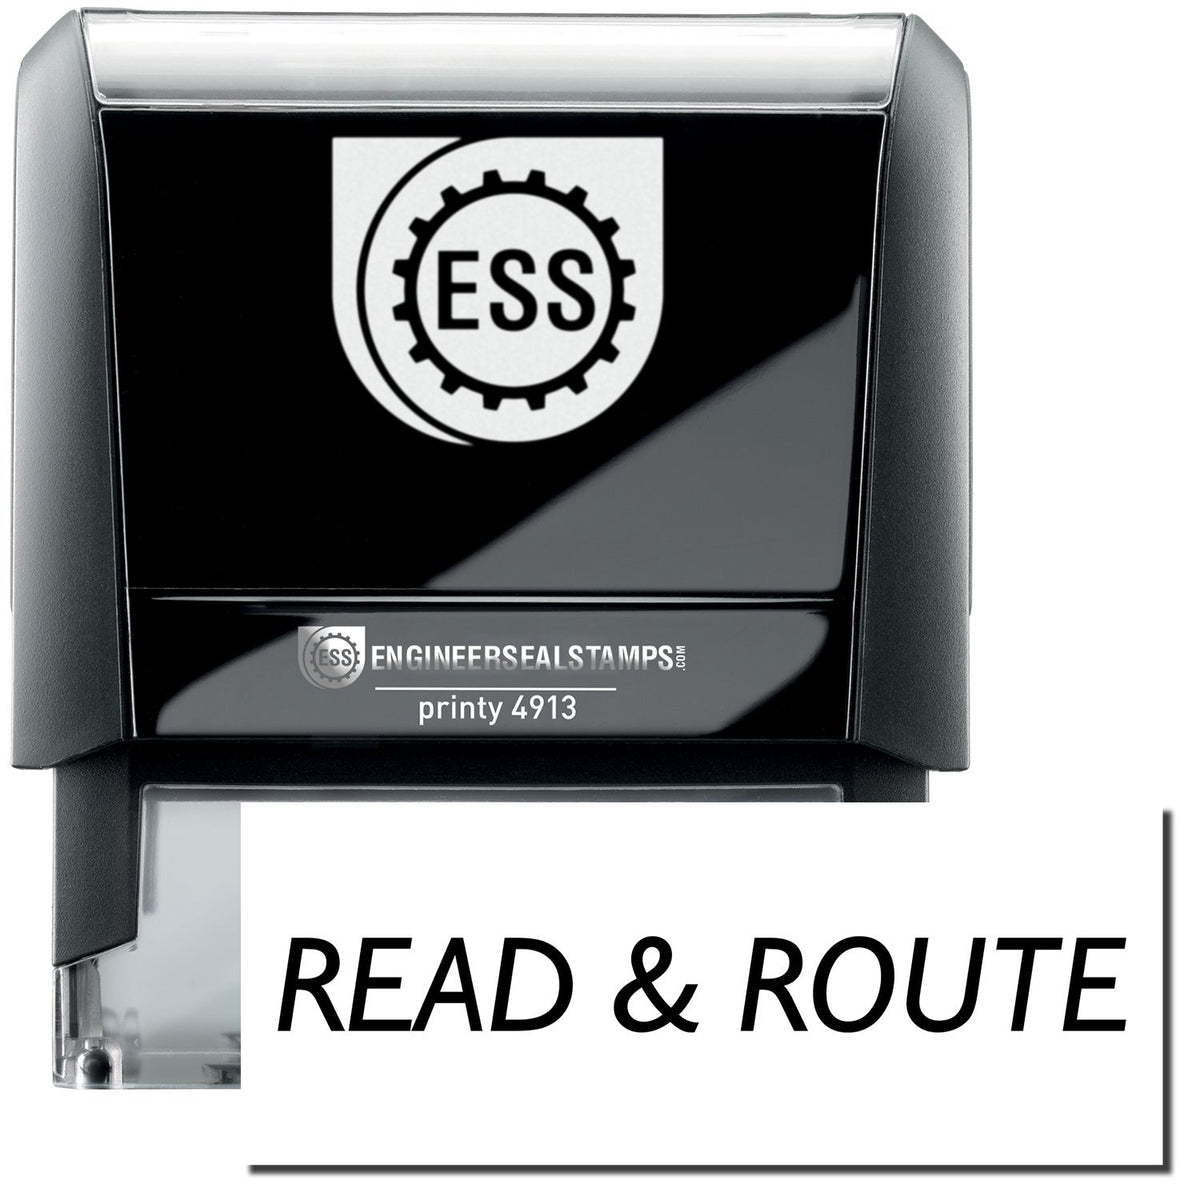 A self-inking stamp with a stamped image showing how the text &quot;READ &amp; ROUTE&quot; in a large bold font is displayed by it.